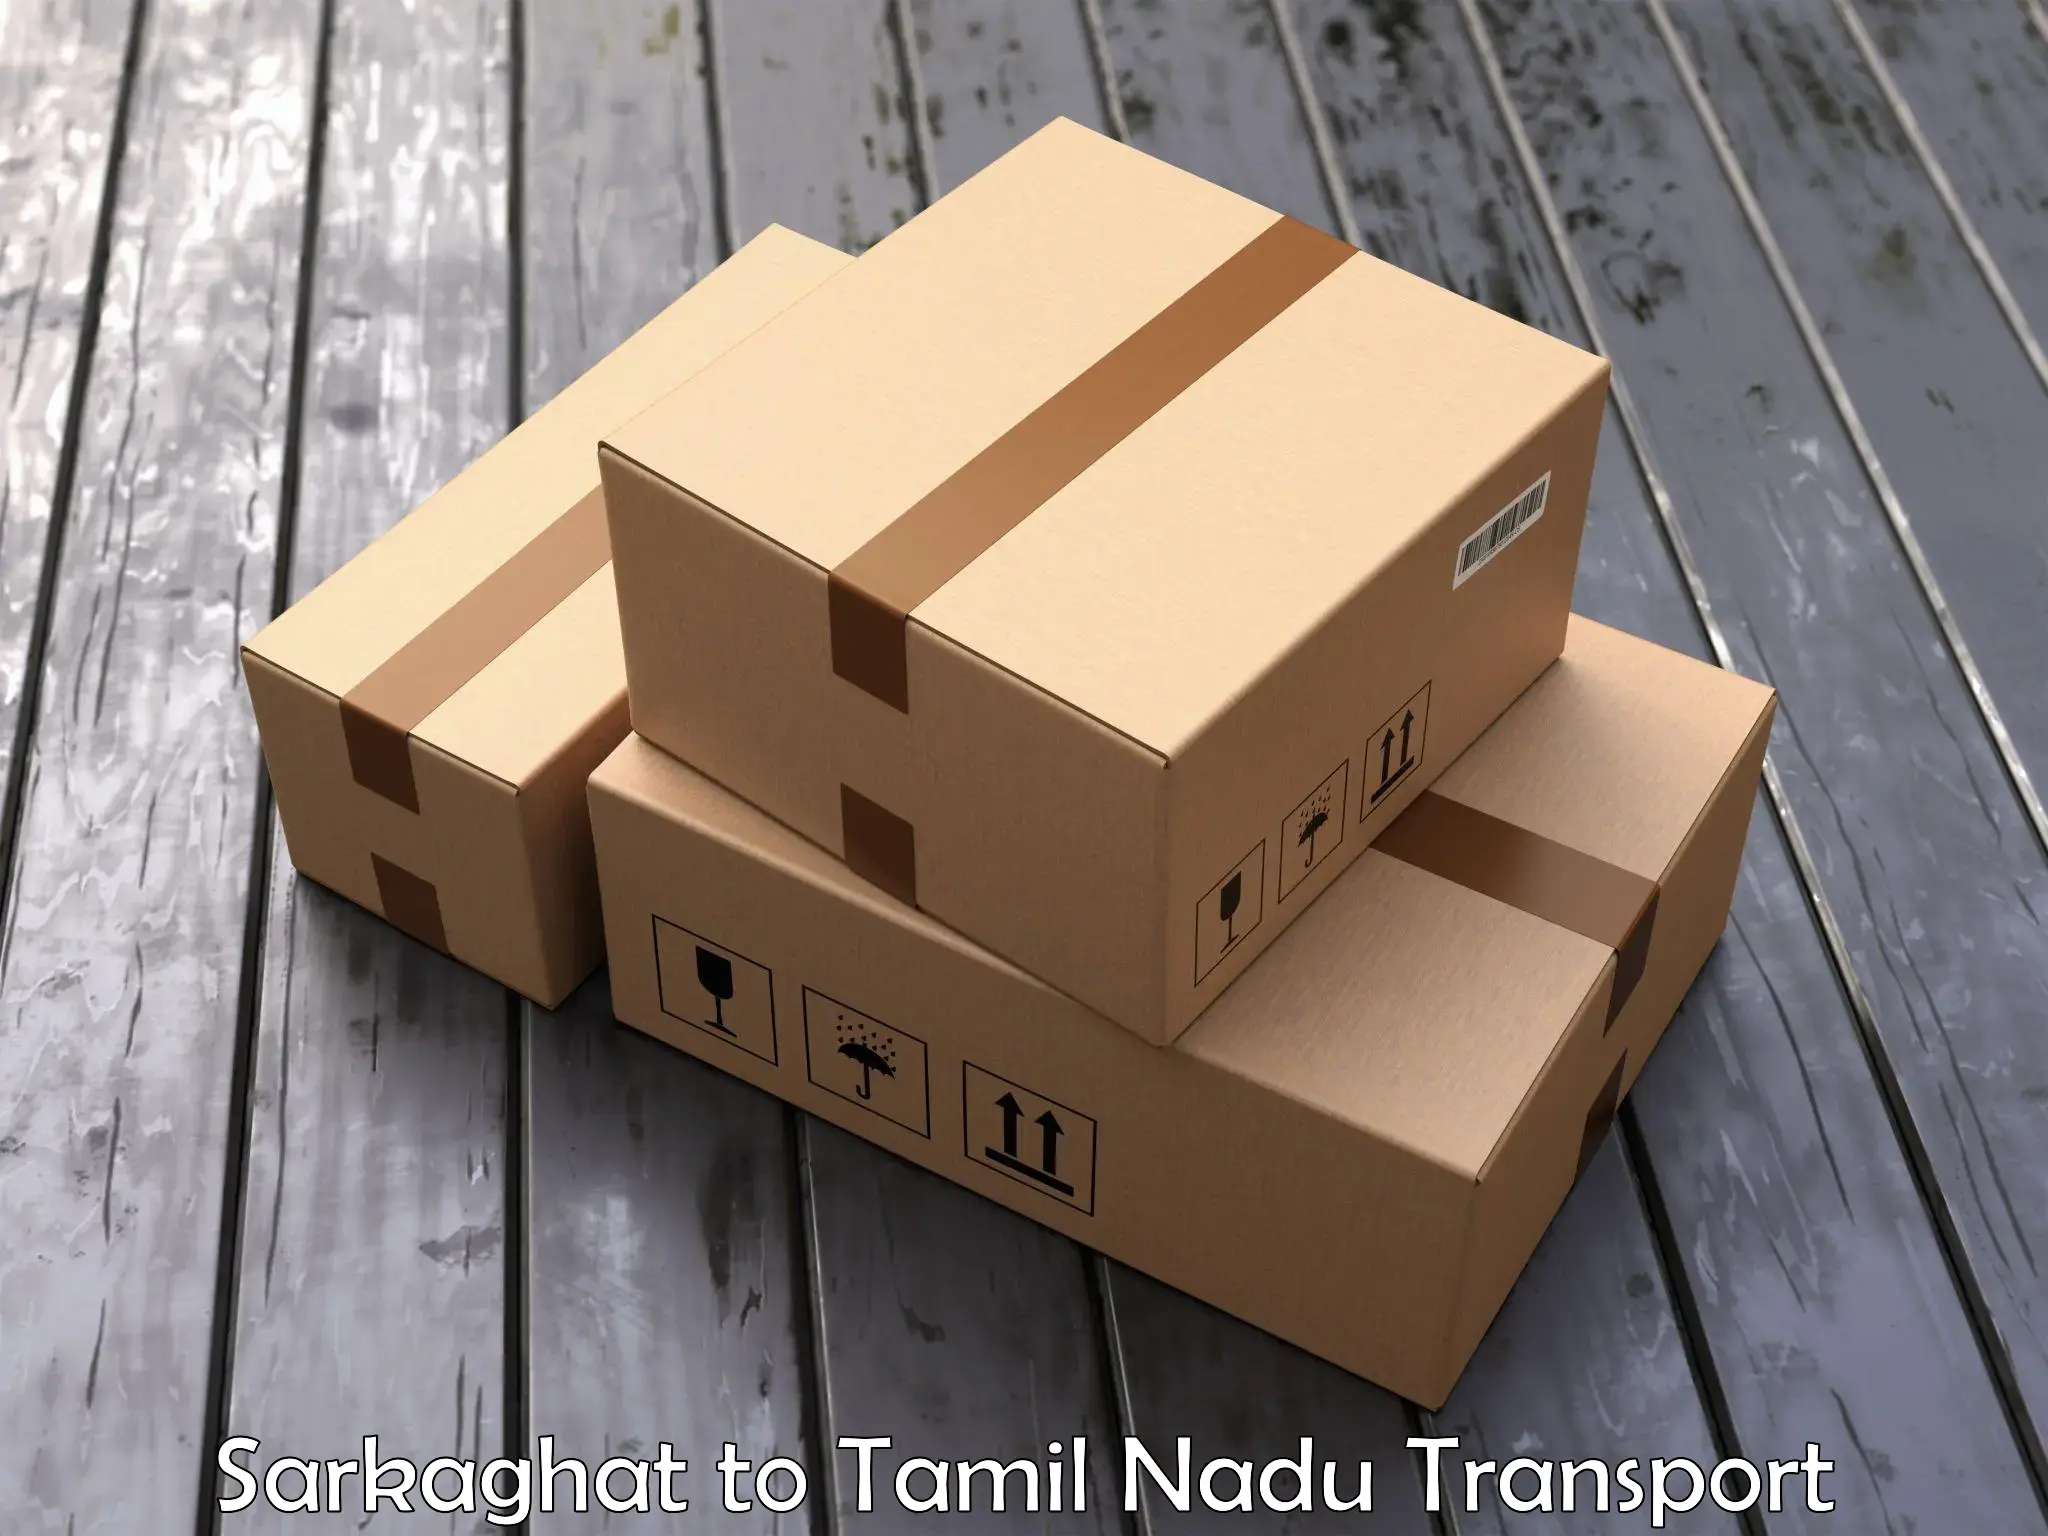 Furniture transport service Sarkaghat to Coimbatore